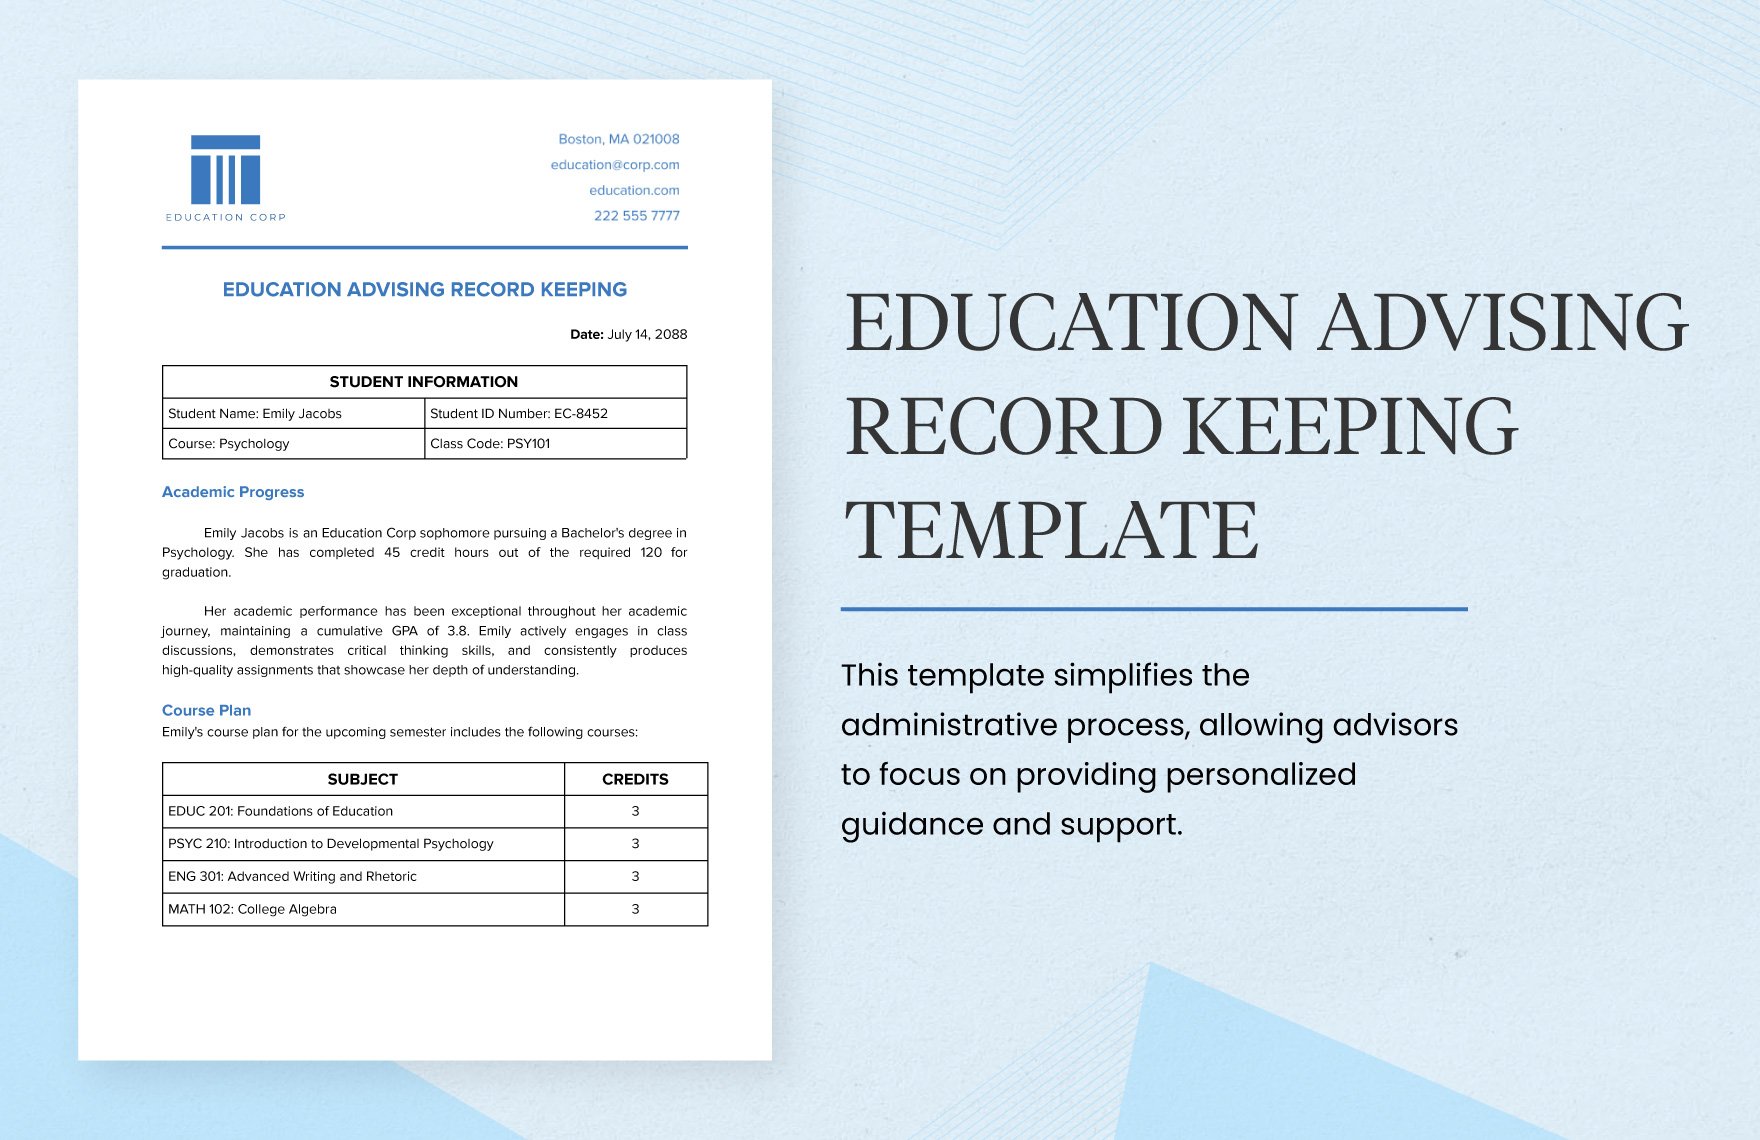 Education Advising Record Keeping Template